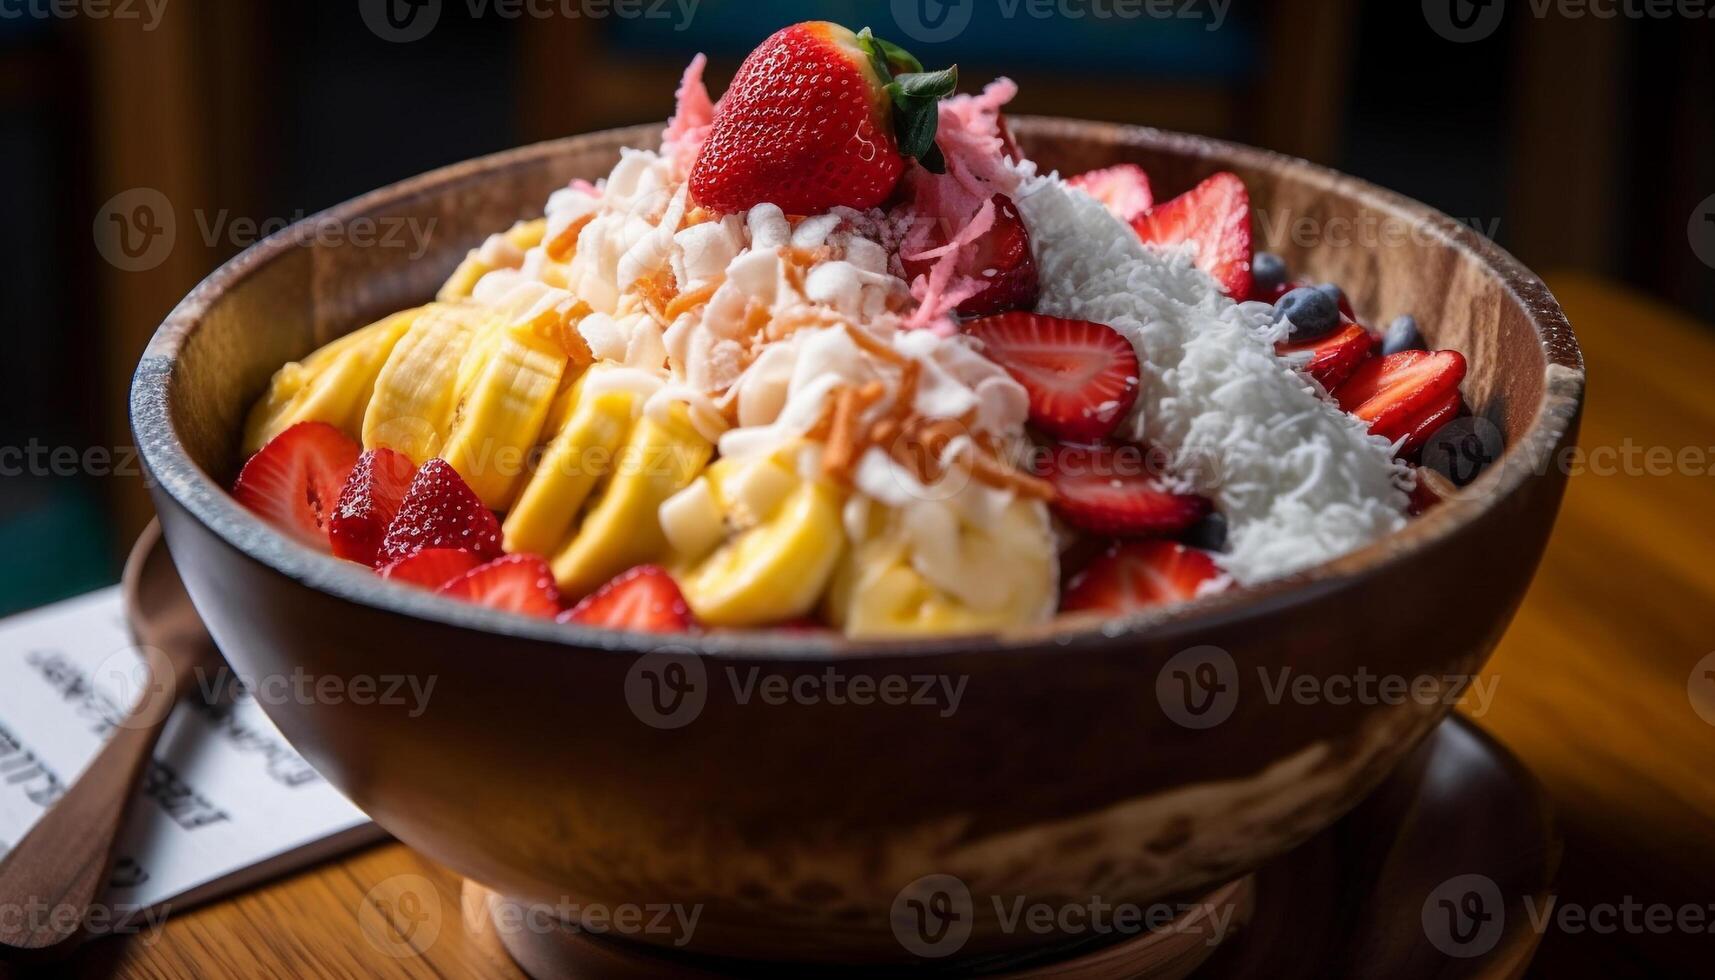 Fresh fruit salad with yogurt, granola, and berries generated by AI photo